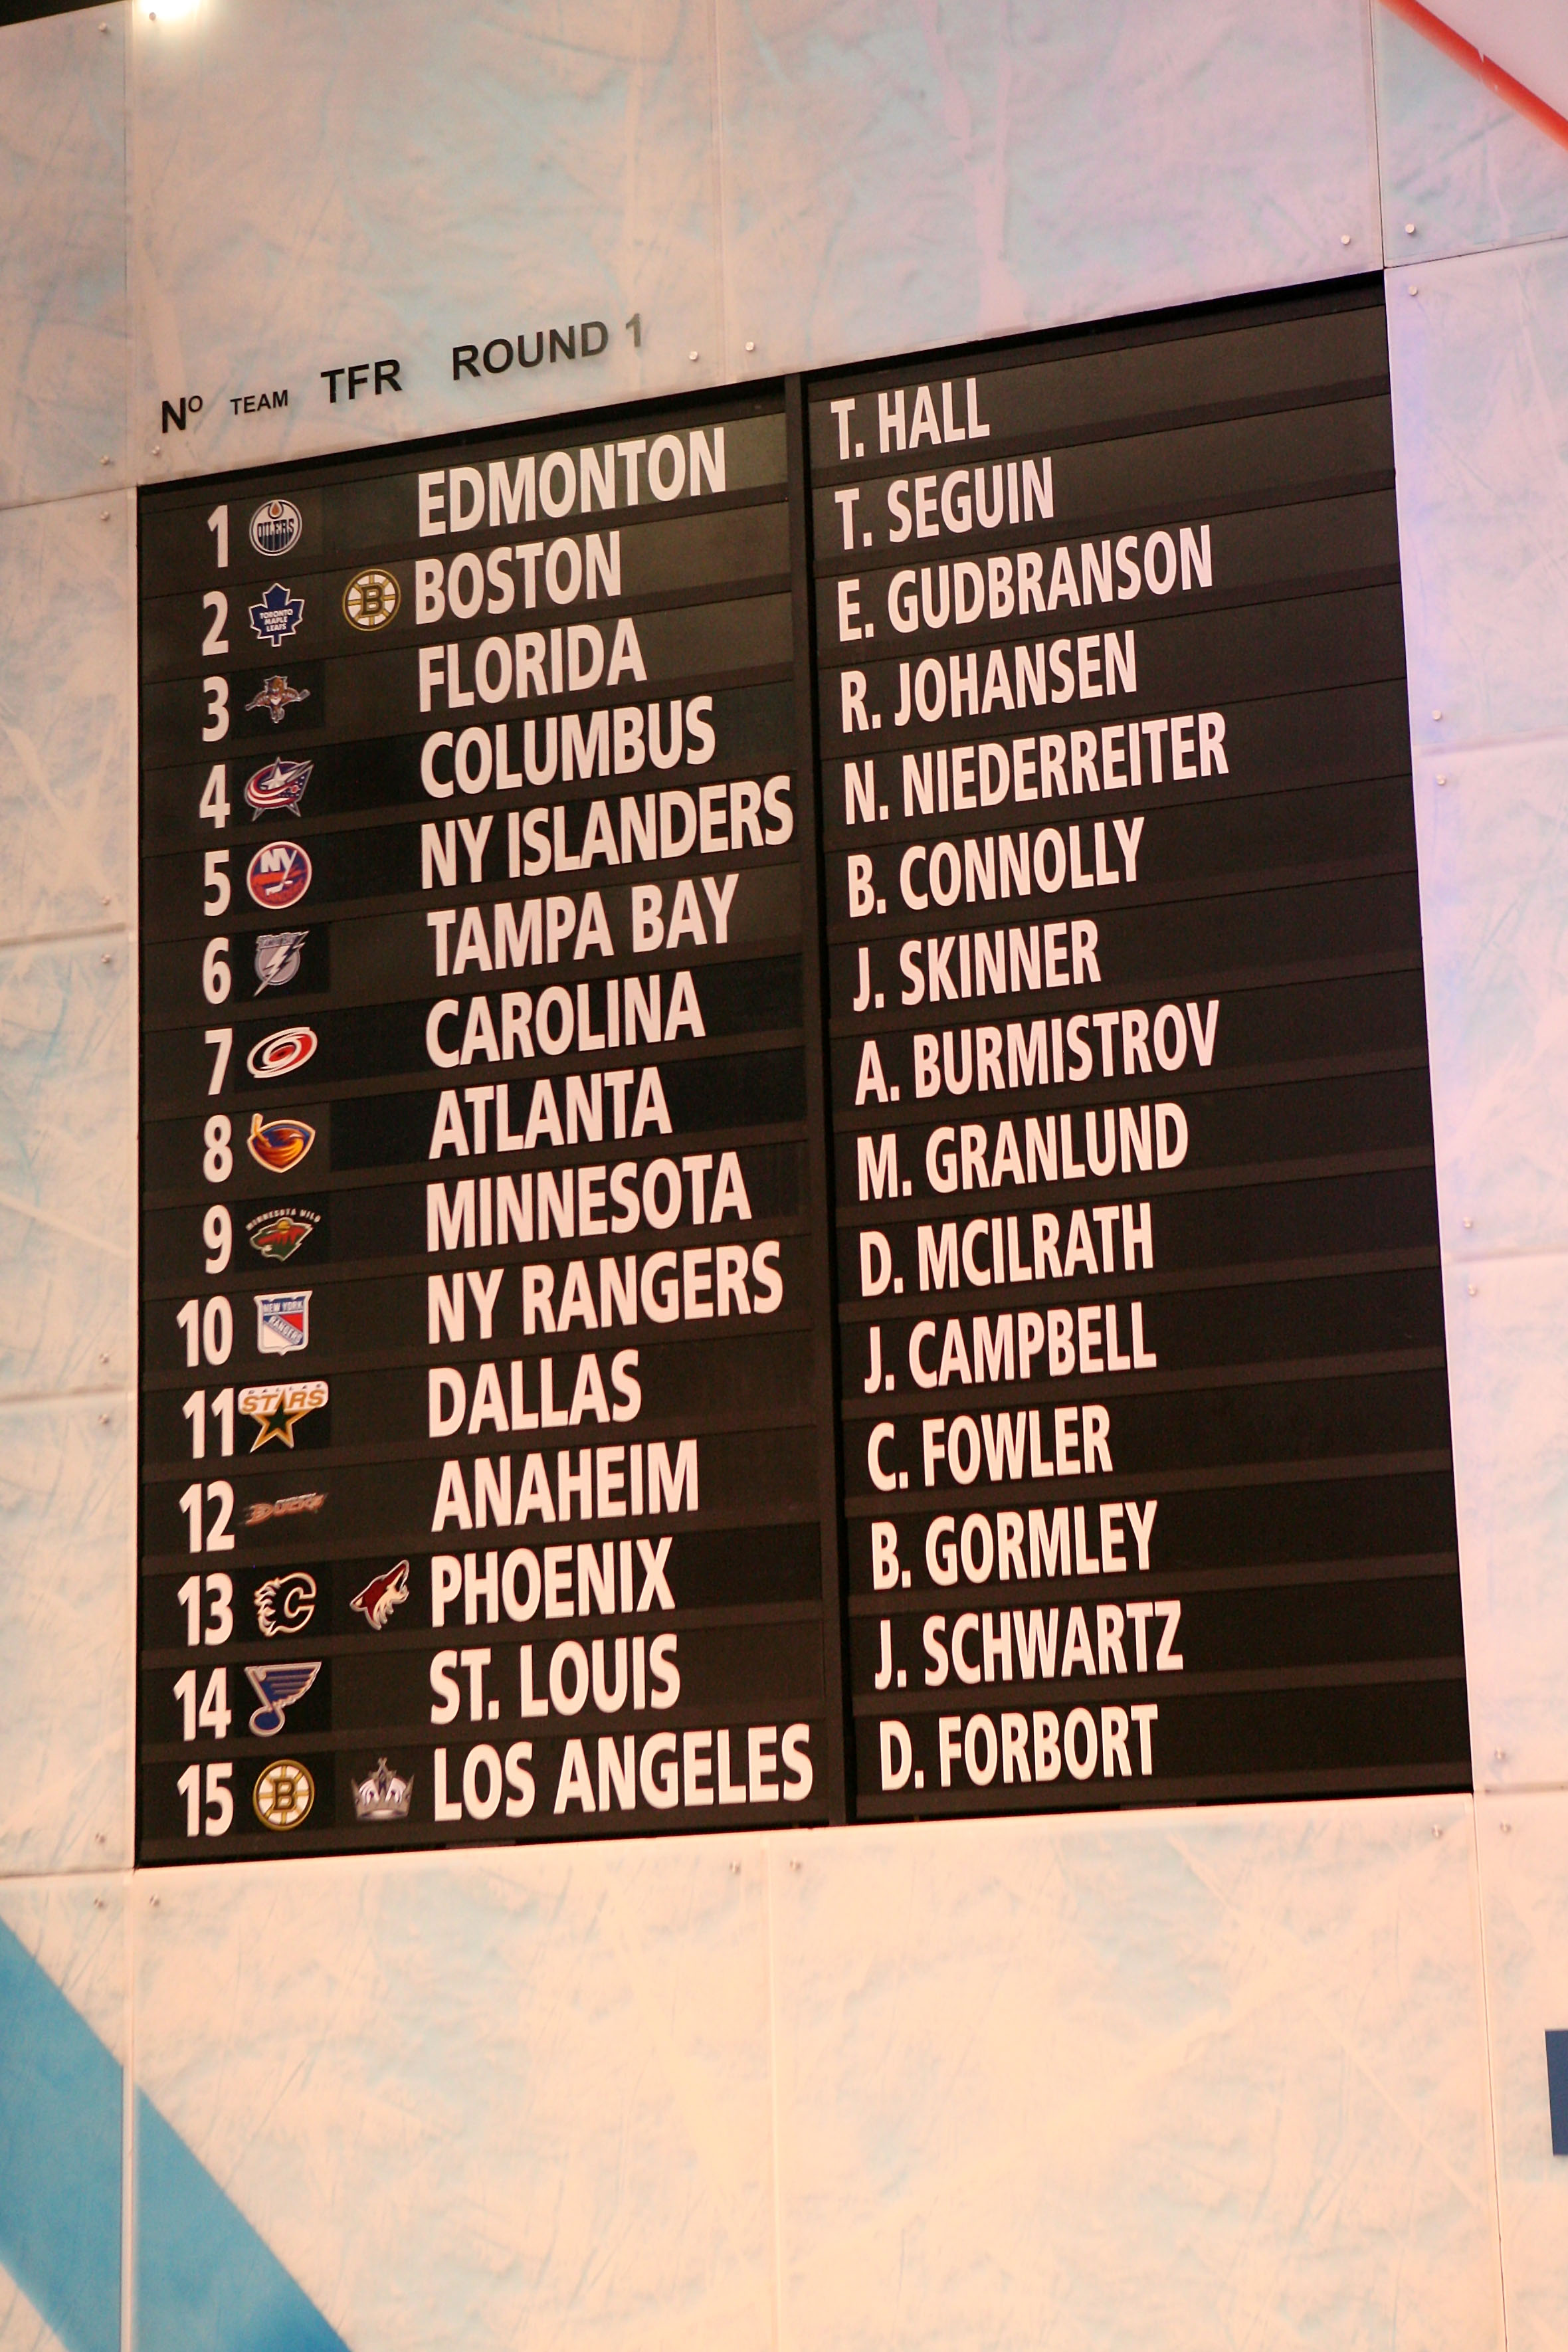 2011 NHL Draft Top 10: Where Are They Now?